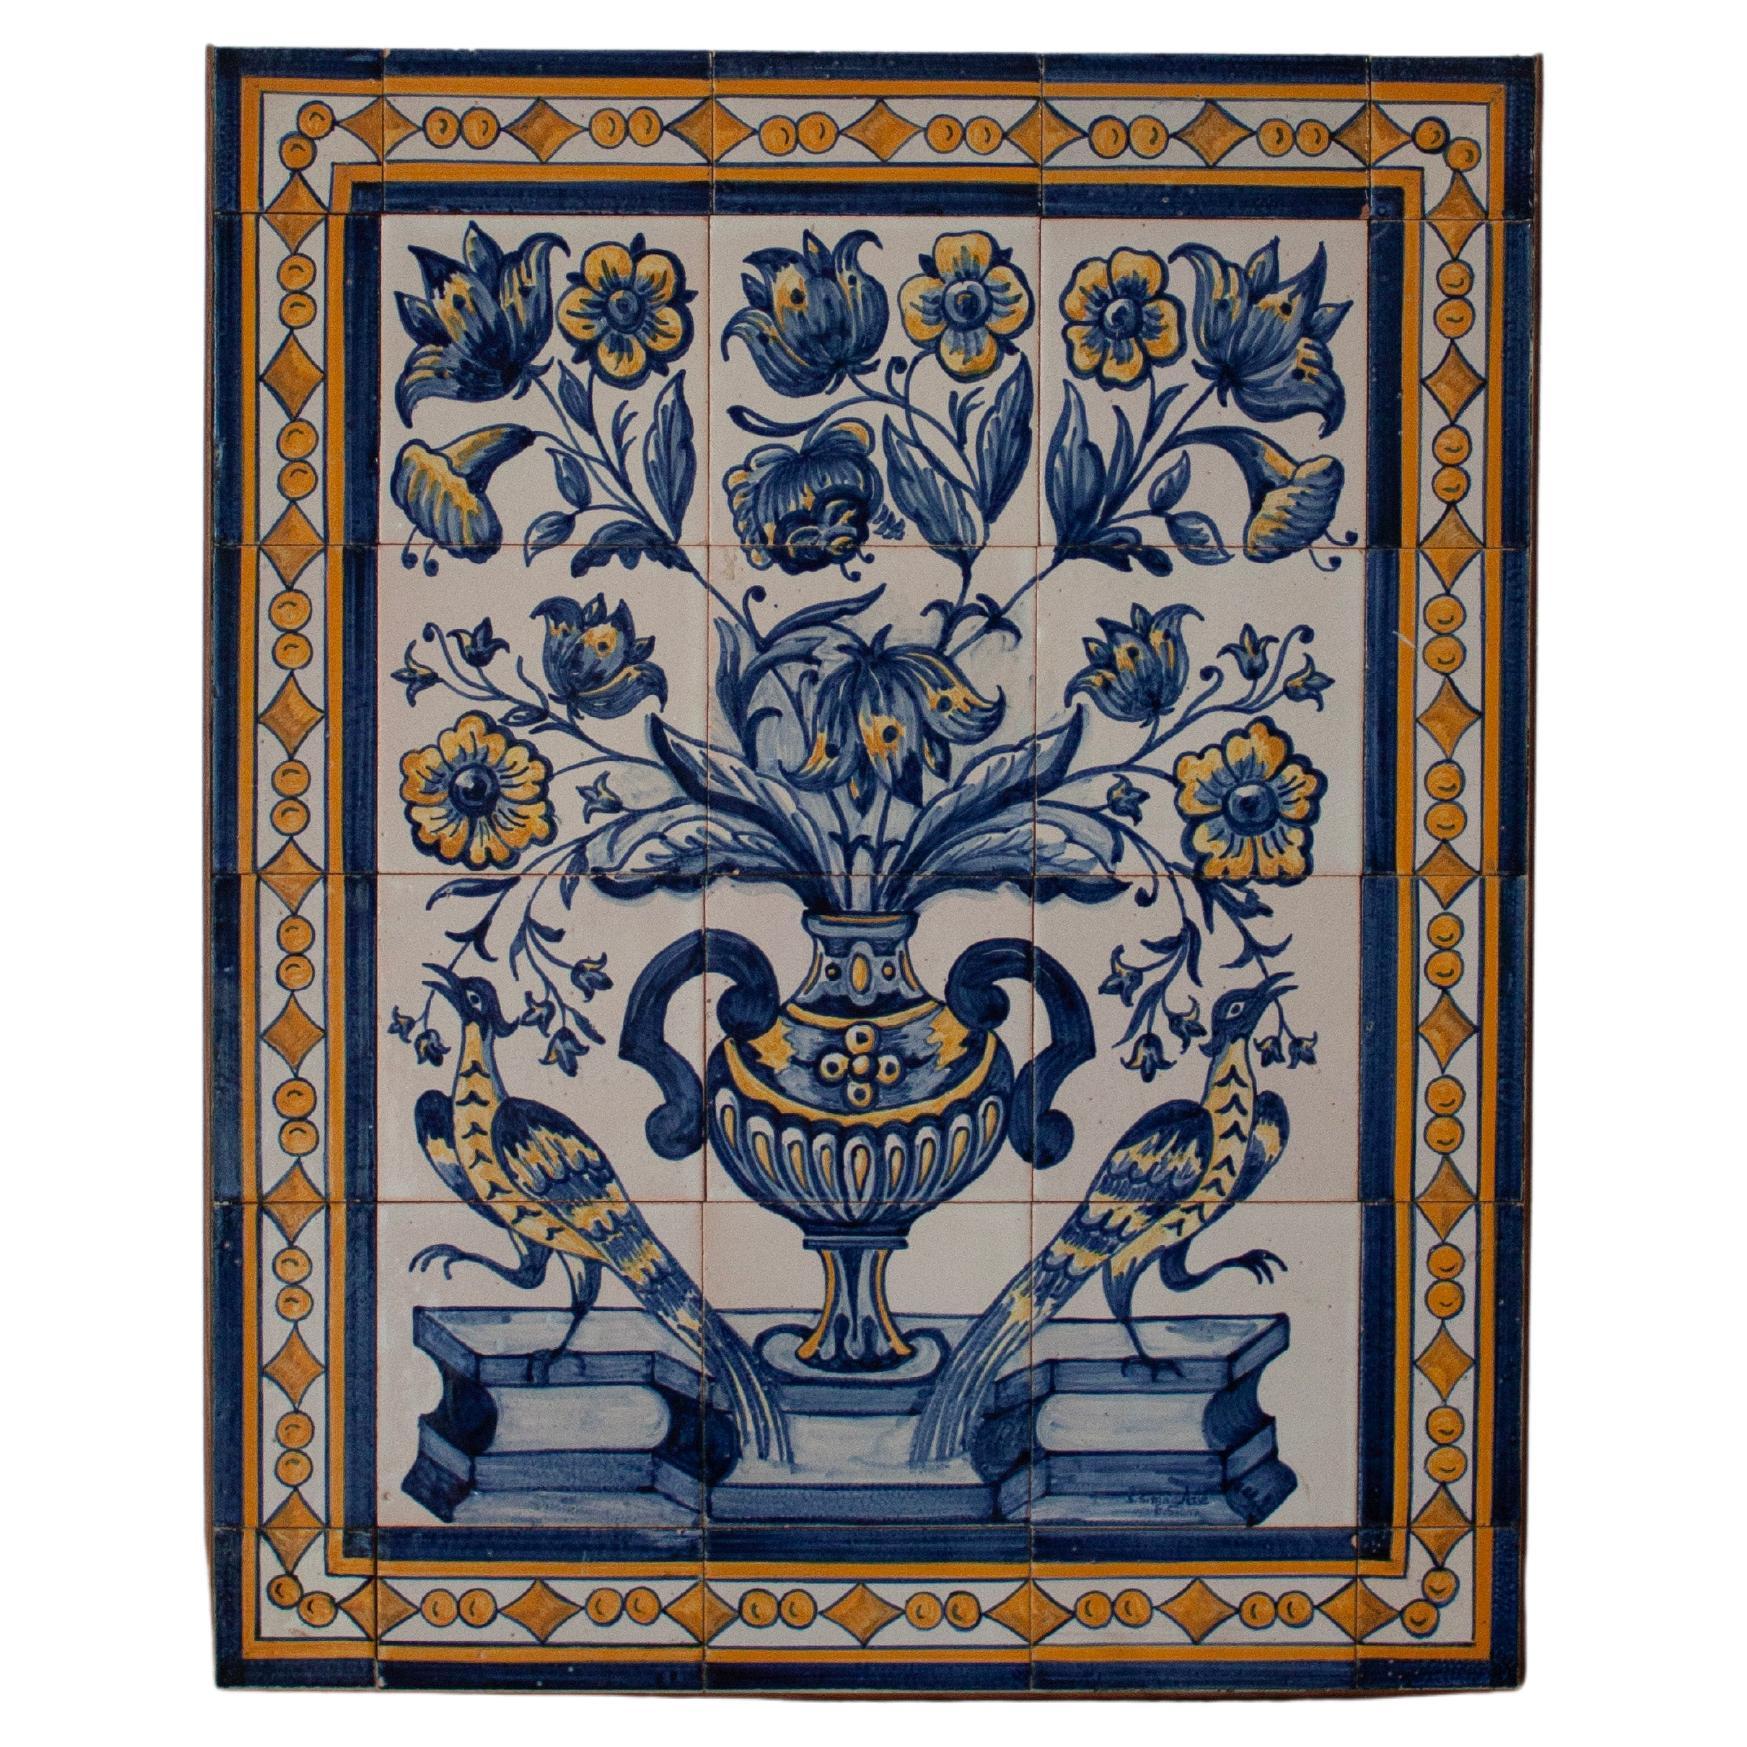 European Floral and Animal Blue and White Tiled Wall Artwork Wall Hanging 